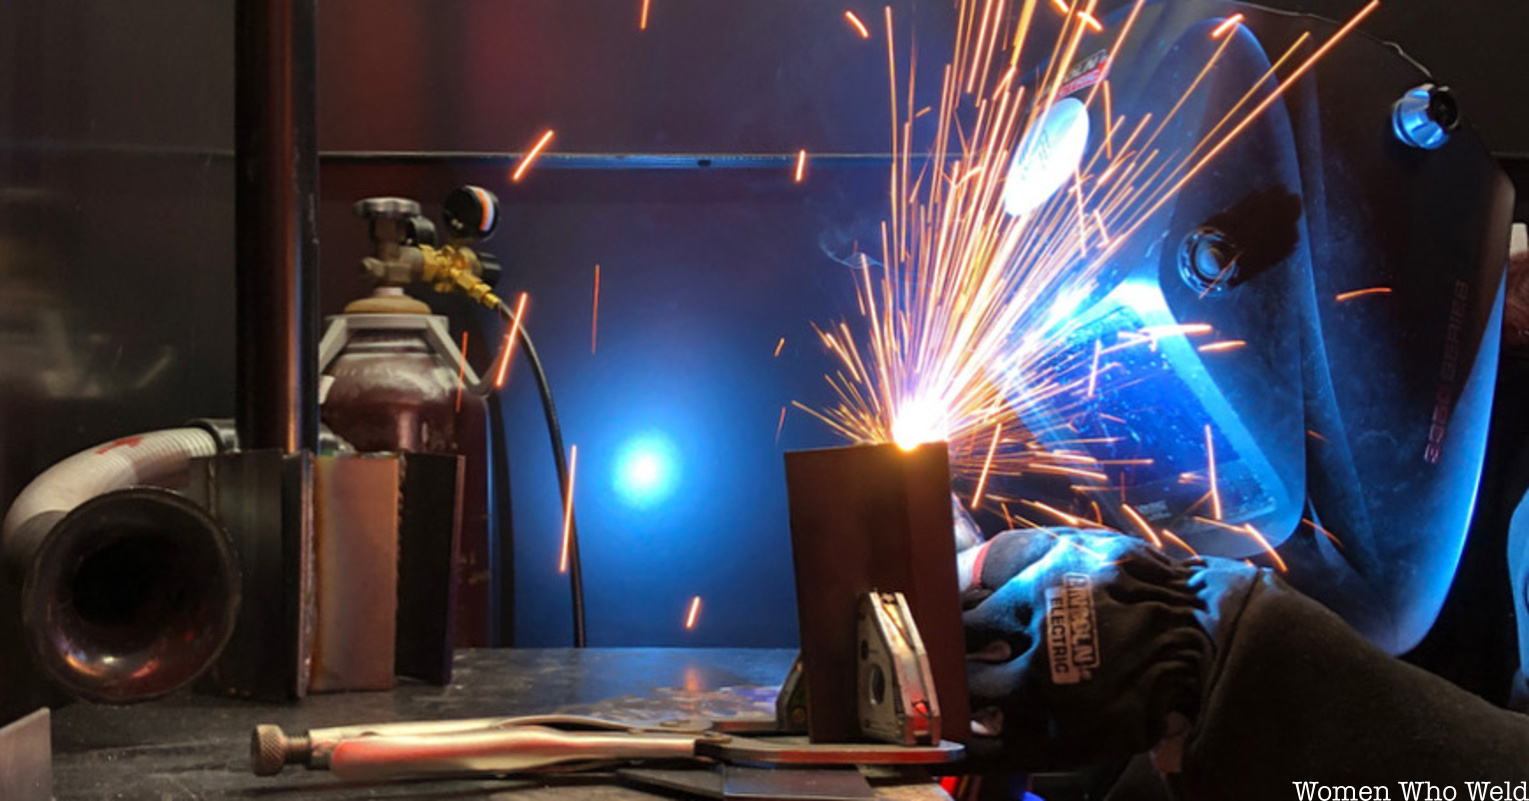 A women in a welding mask makes sparks as she welds